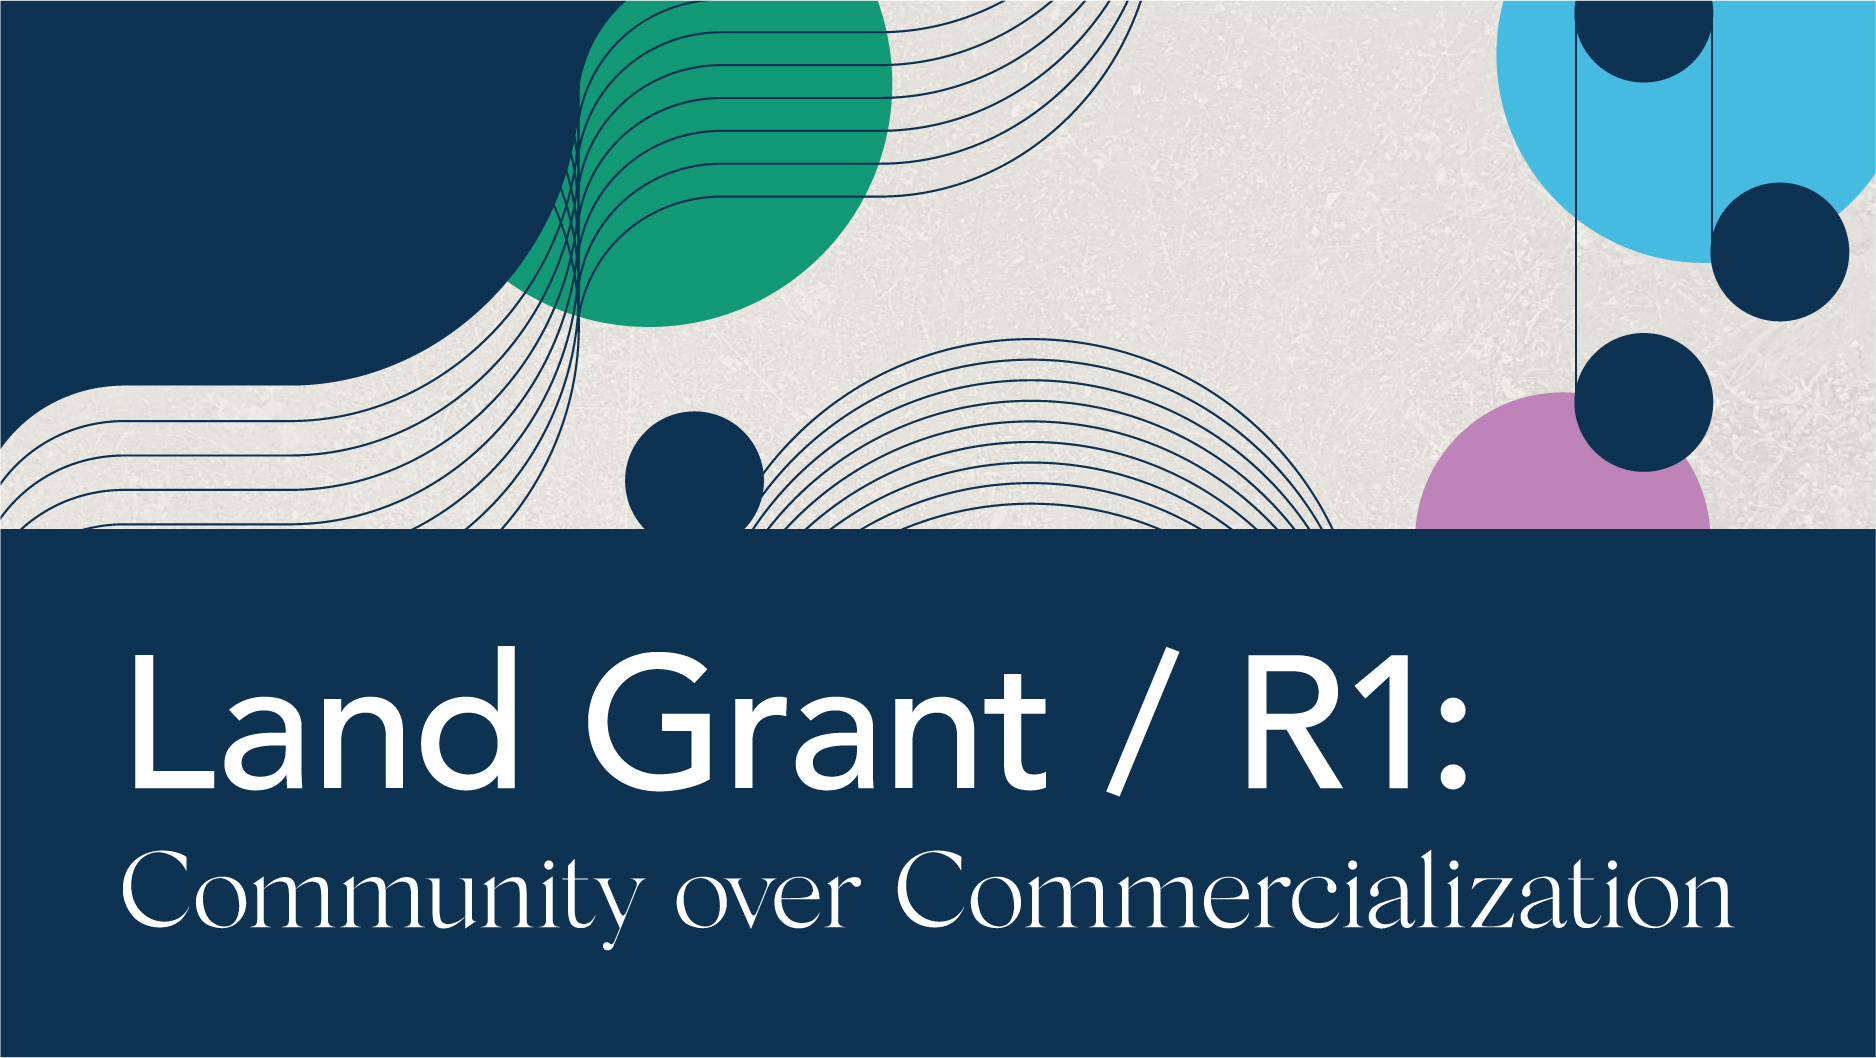 Land grant/r1: Community over Commercialization